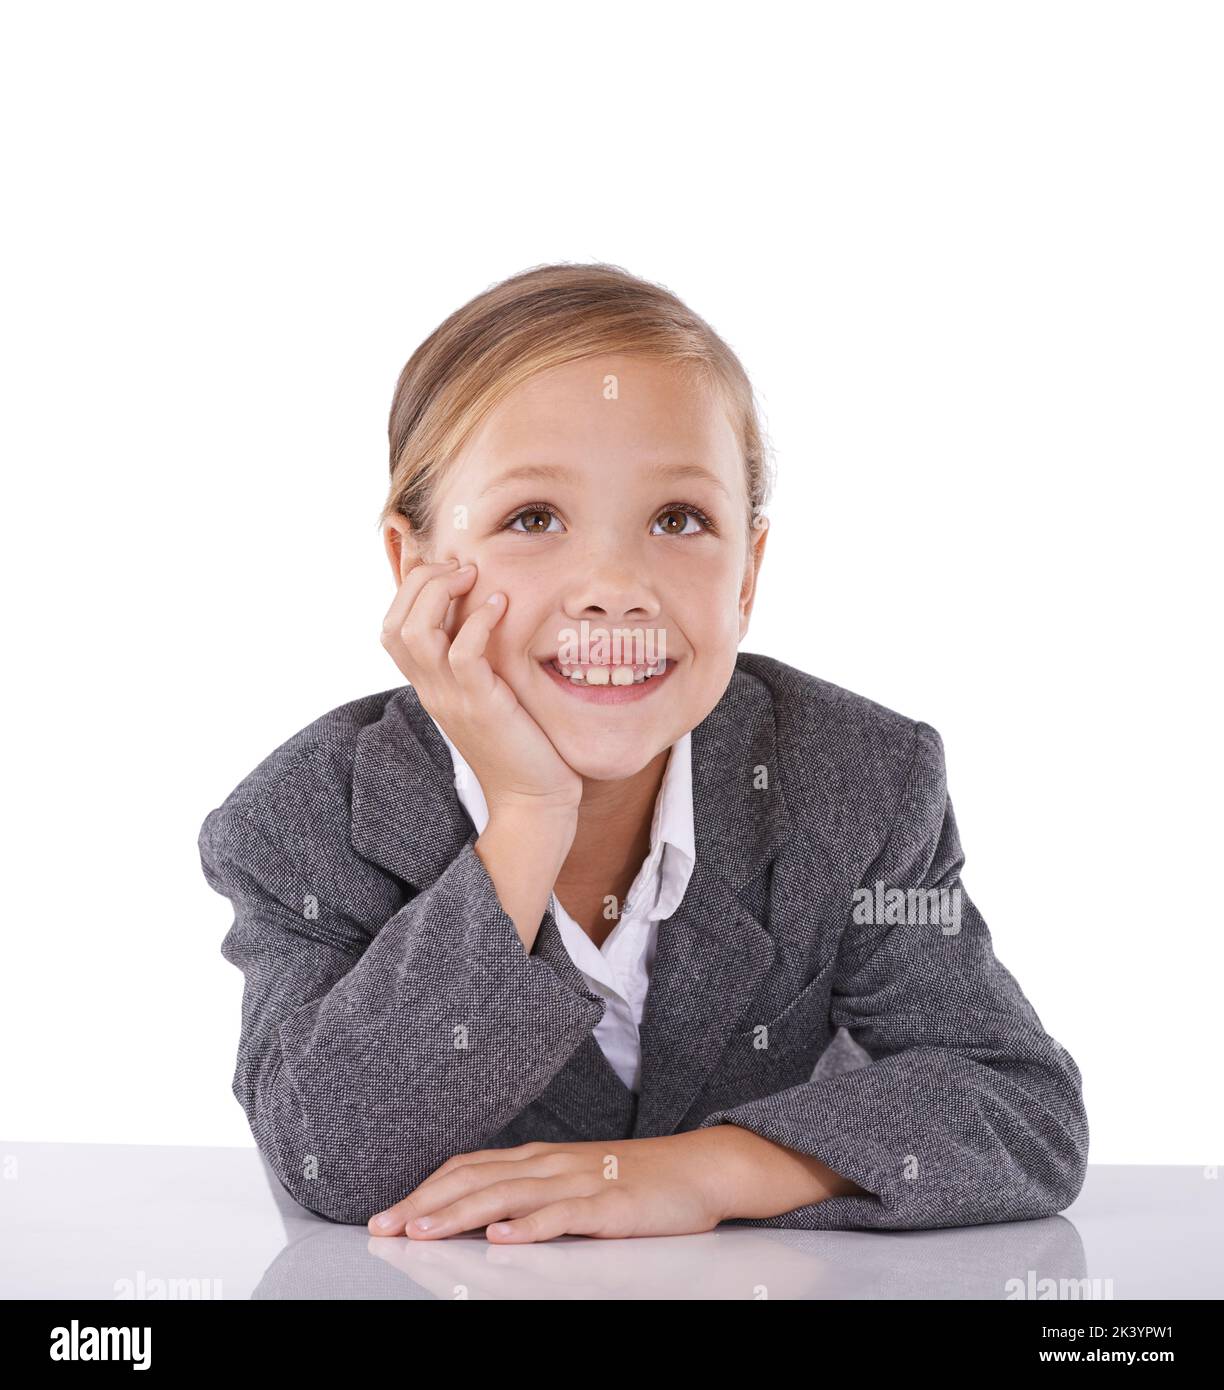 Shes dreaming big already. Studio shot of a cute little girl dressed like a businessperson. Stock Photo